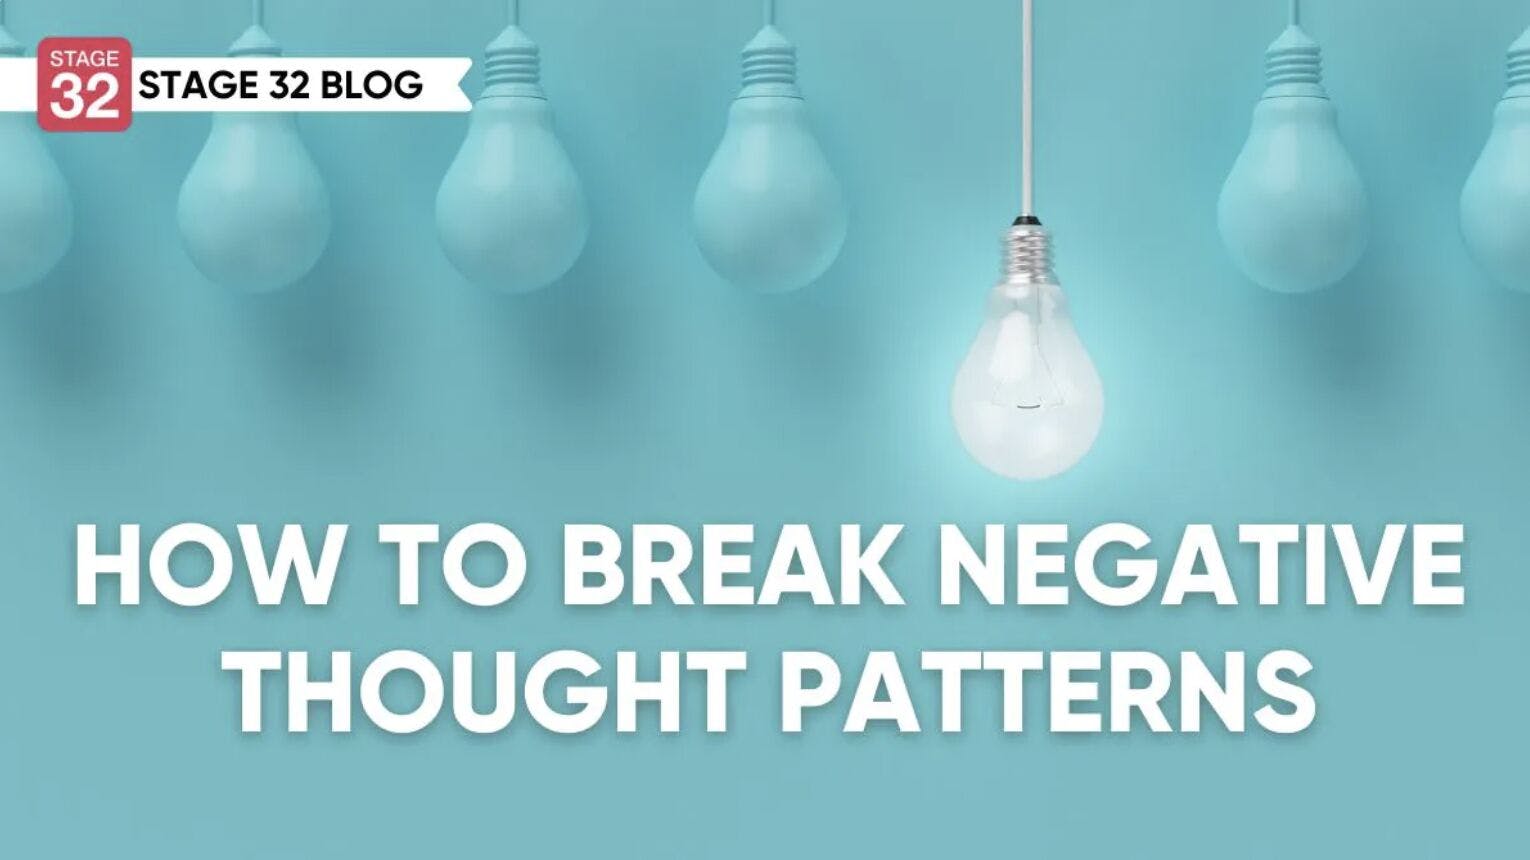 How to Break Negative Thought Patterns